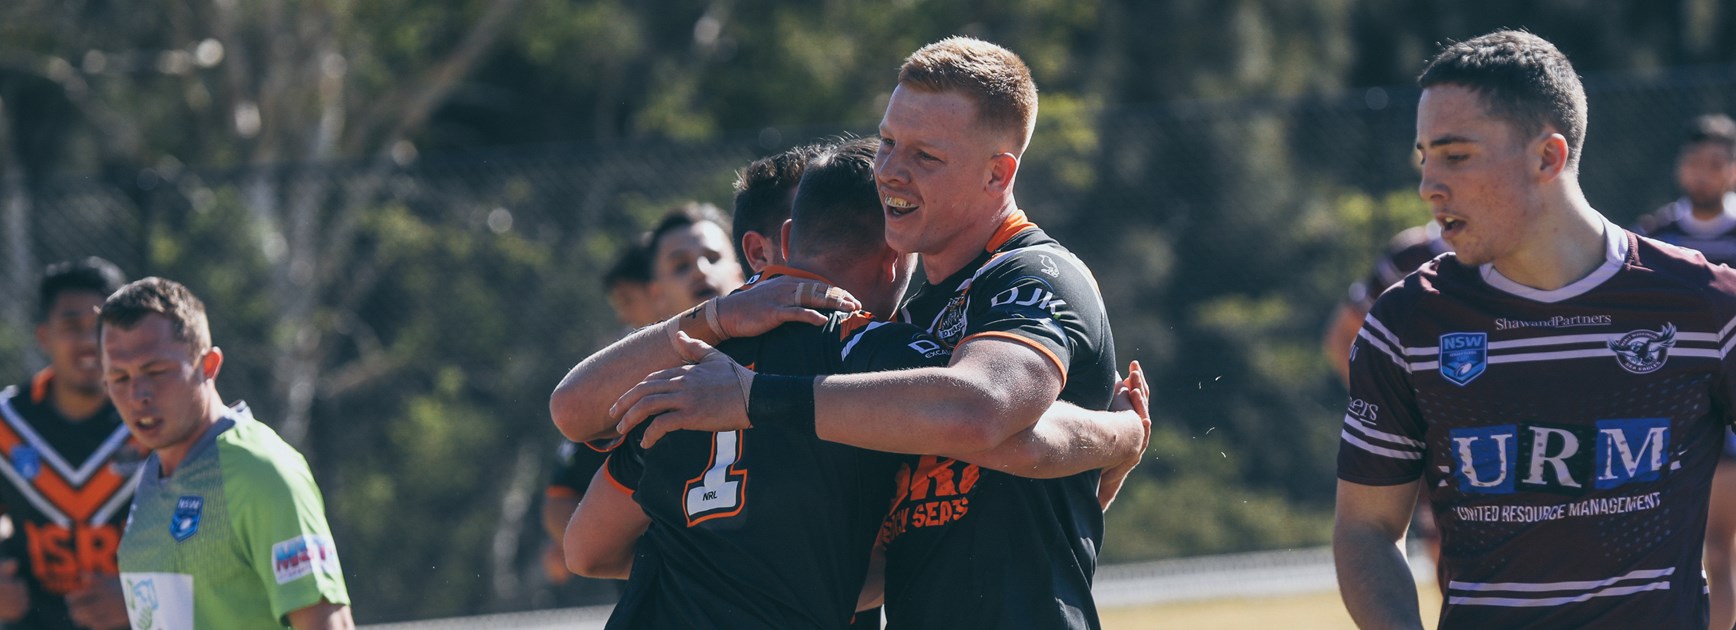 Wests Tigers cruise to big win over Sea Eagles